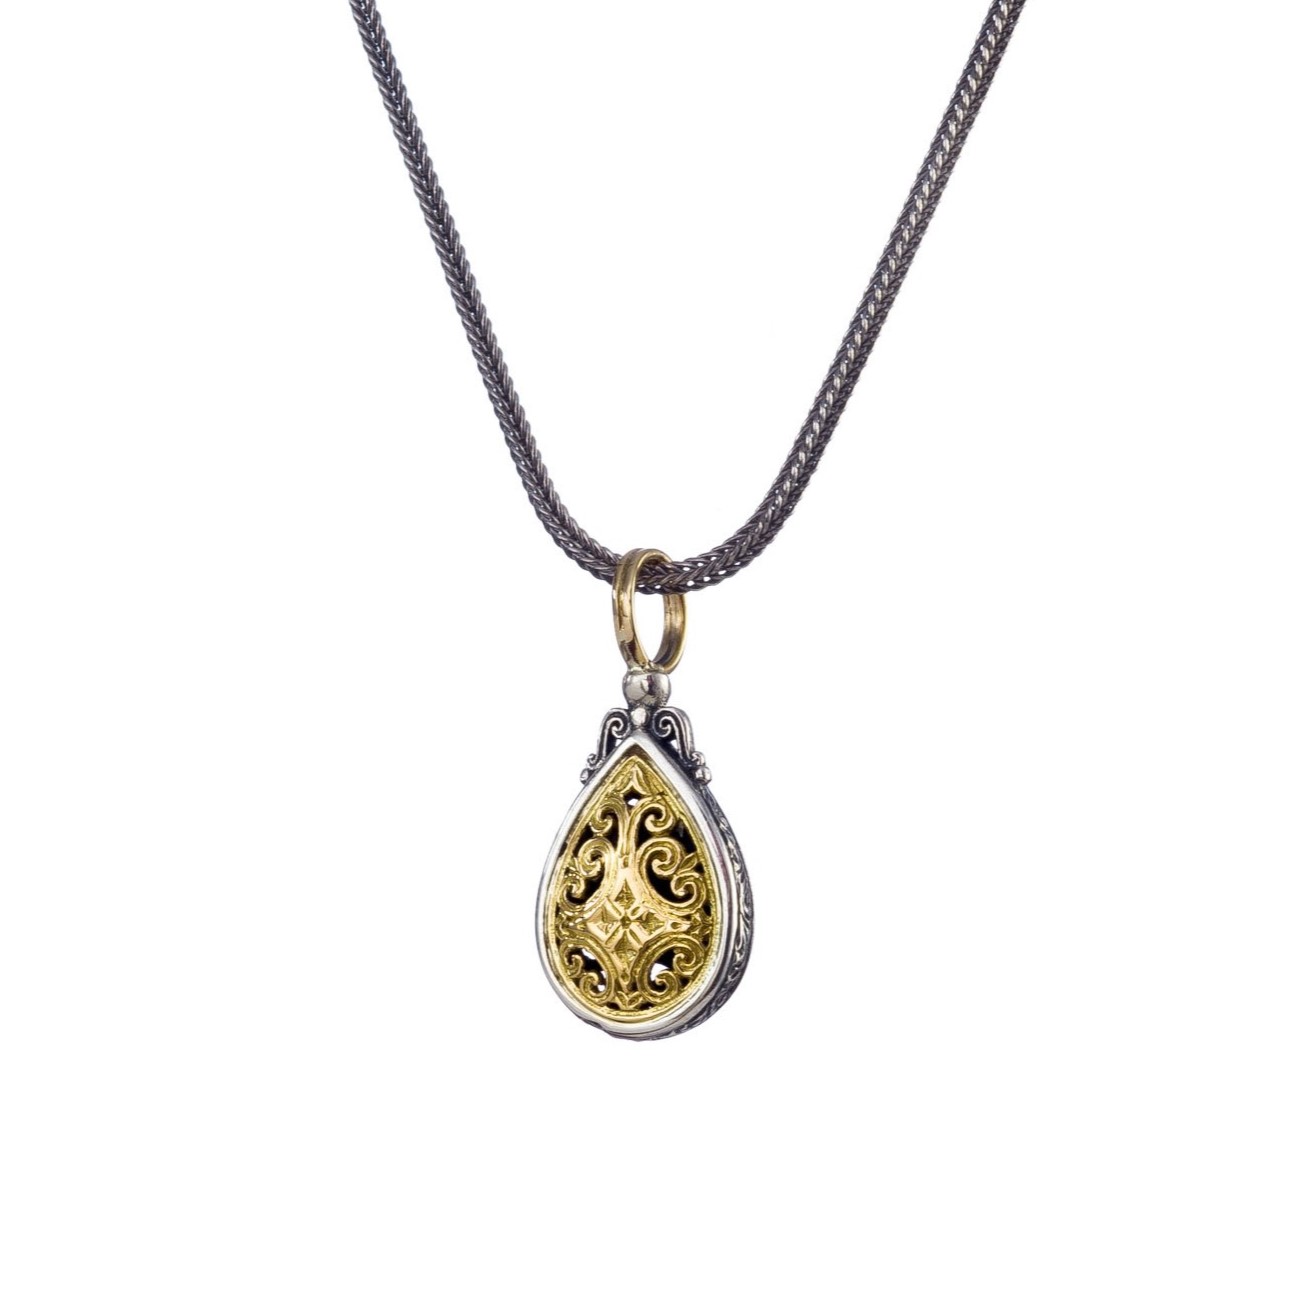 Mediterranean drop pendant in 18K Gold and Sterling silver